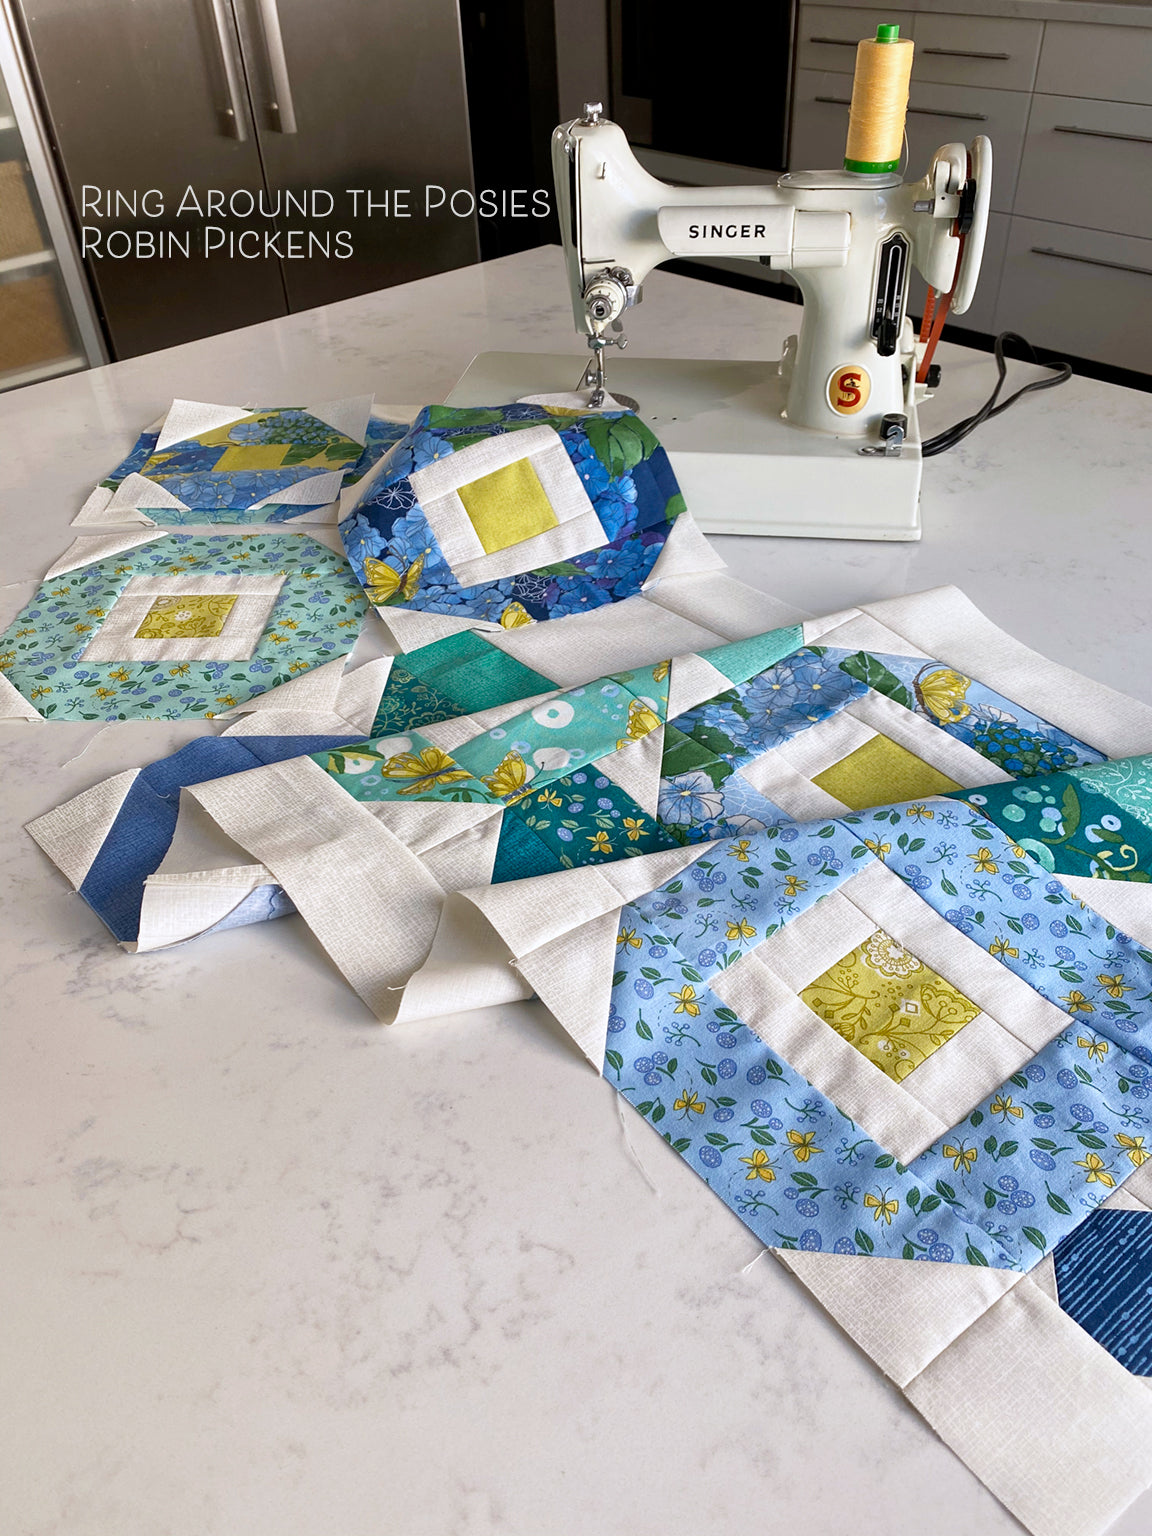 RING AROUND THE POSIES Quilt Pattern, digital download for 64 1/2 x 64 1/2" quilt